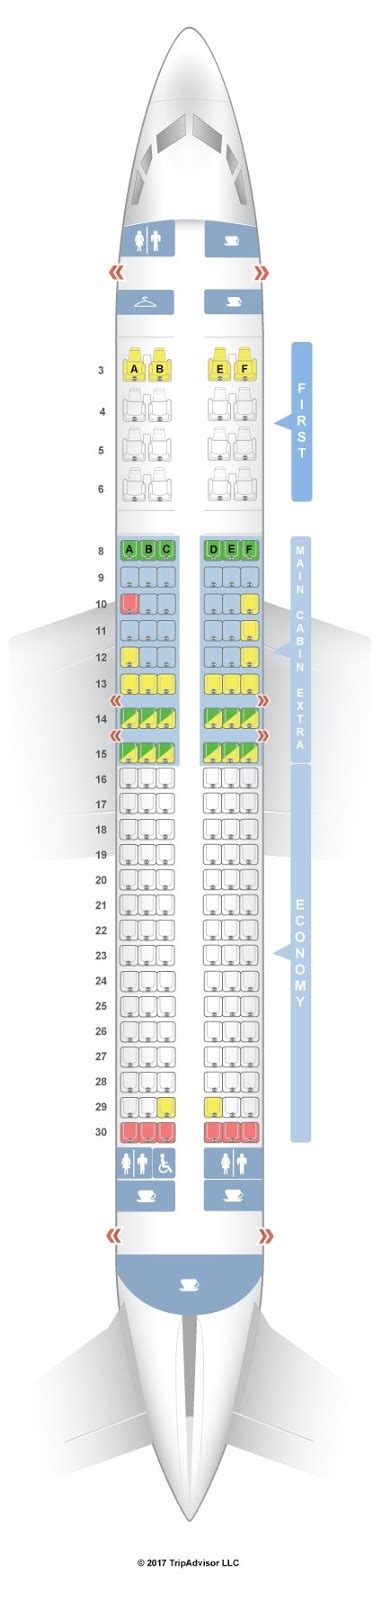 For your next American Airlines flight, use this seating chart to ge